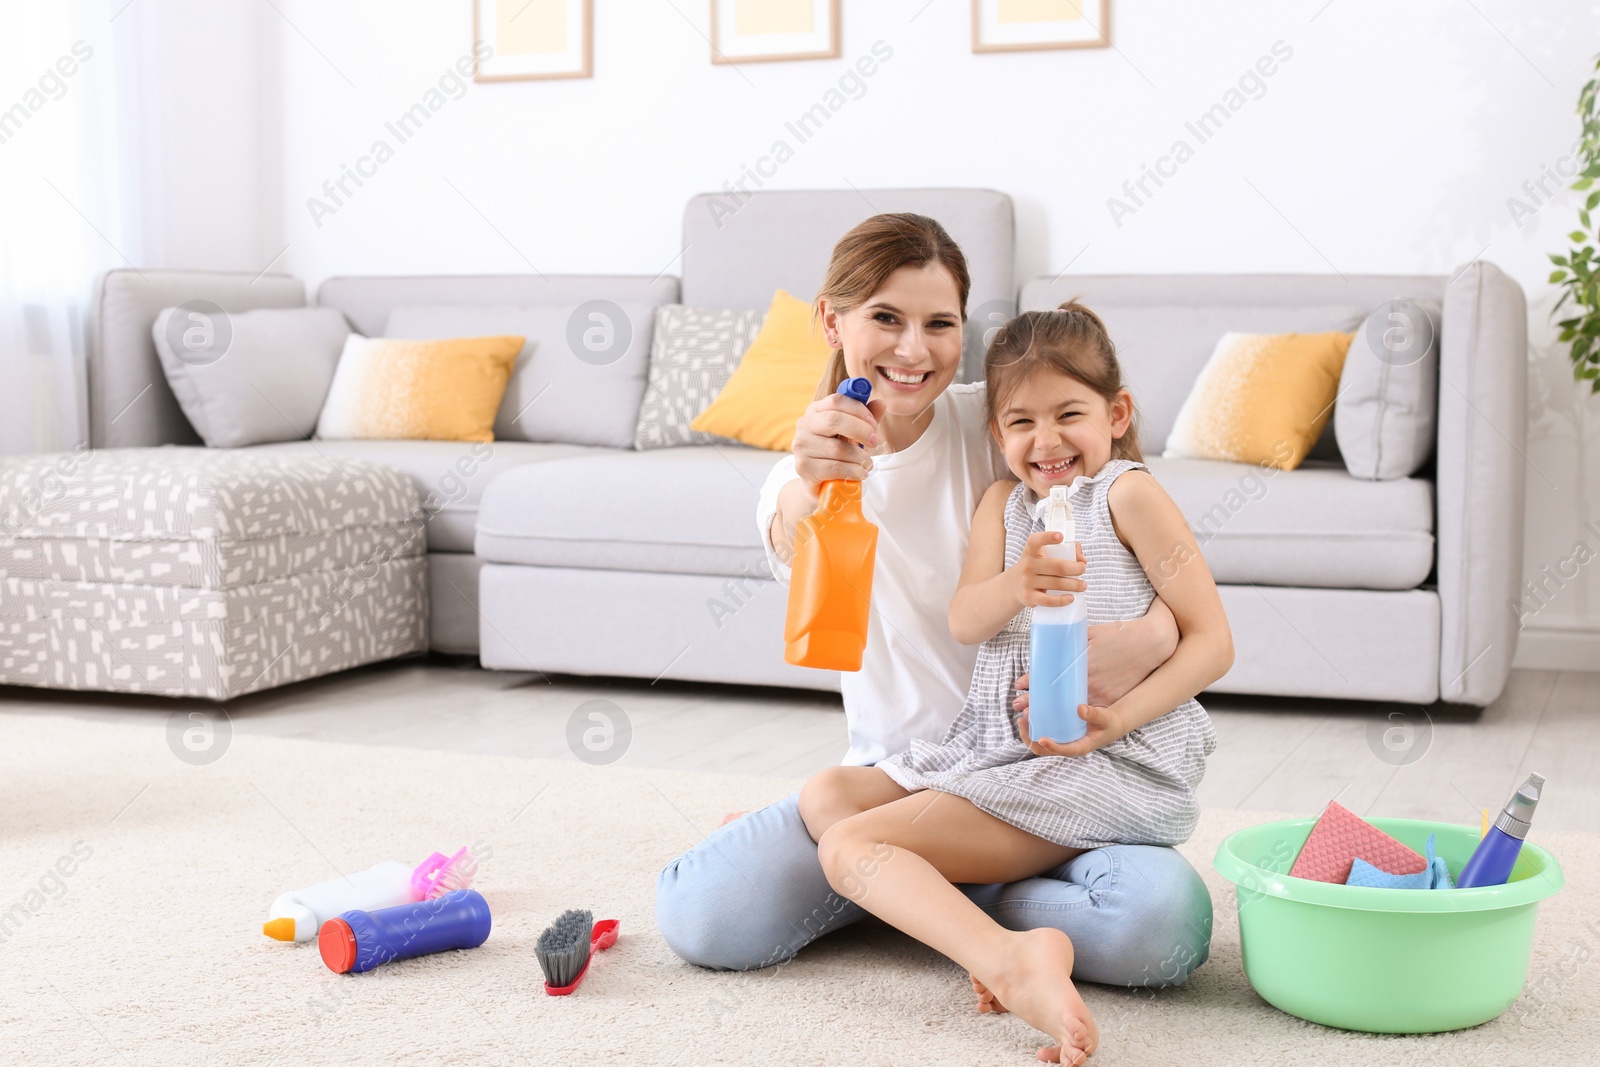 Photo of Housewife and daughter having fun after cleaning in room